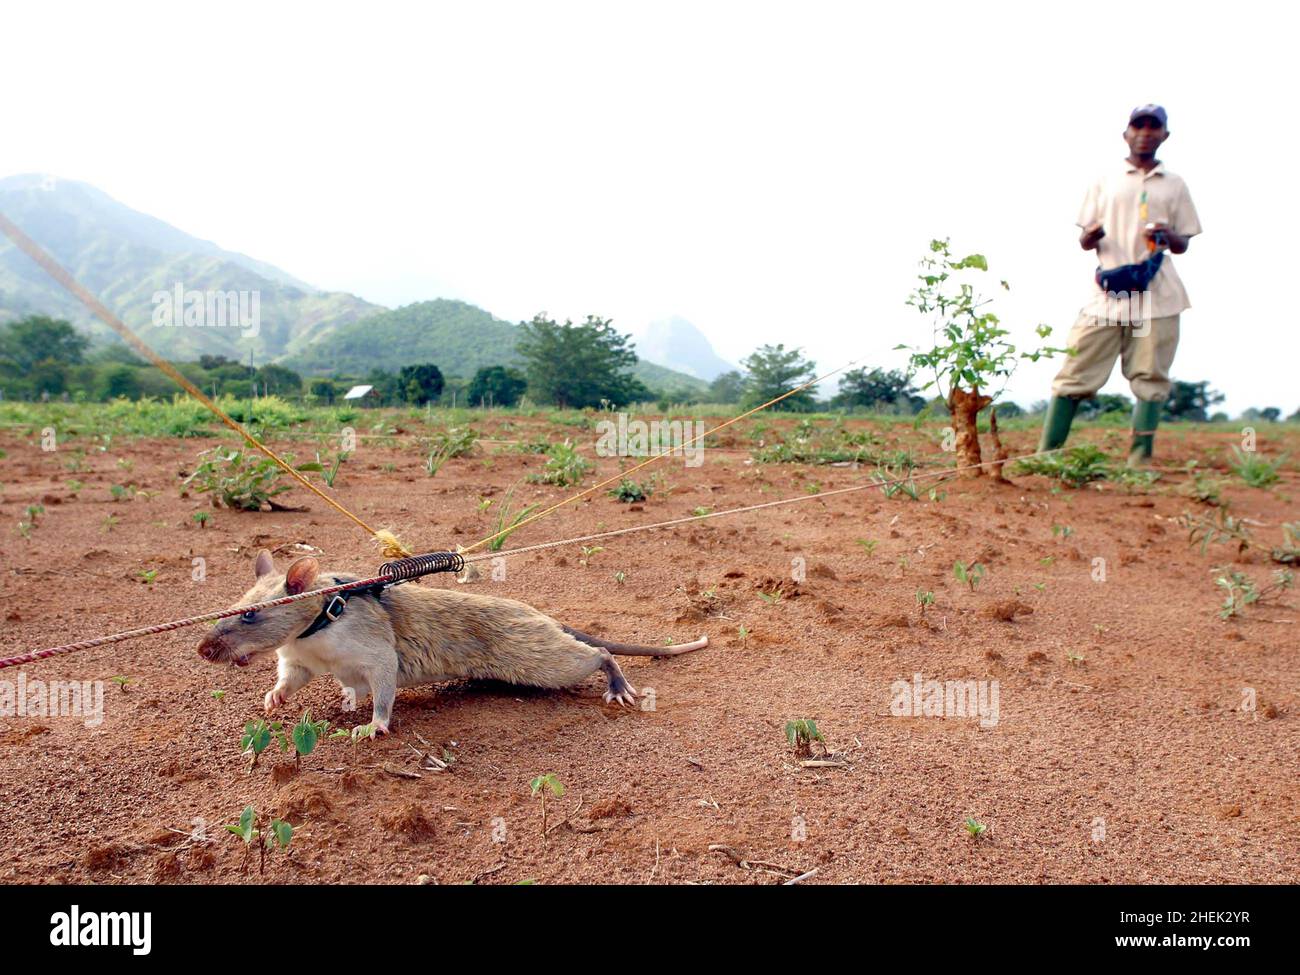 A  RAT SEARCHES FOR A LANDMINE IN A SIMULATED MINEFIELD WHILST TETHERED TO A GUIDE ROPE AND LEASH AND GUIDED BY ITS HANDLER AT THE APOPO TRAINING CENTRE, SOKOINE UNIVERSITY OF AGRICULTURE, MOROGORO, TANZANIA. AT THE CENTRE THE BELGIUM COMPANY (APOPO), THE BRAINCHILD OF BART WEETJENS, IS TRAINING RATS TO DETECT LANDMINES FOR USE IN WAR TORN REGIONS. Stock Photo